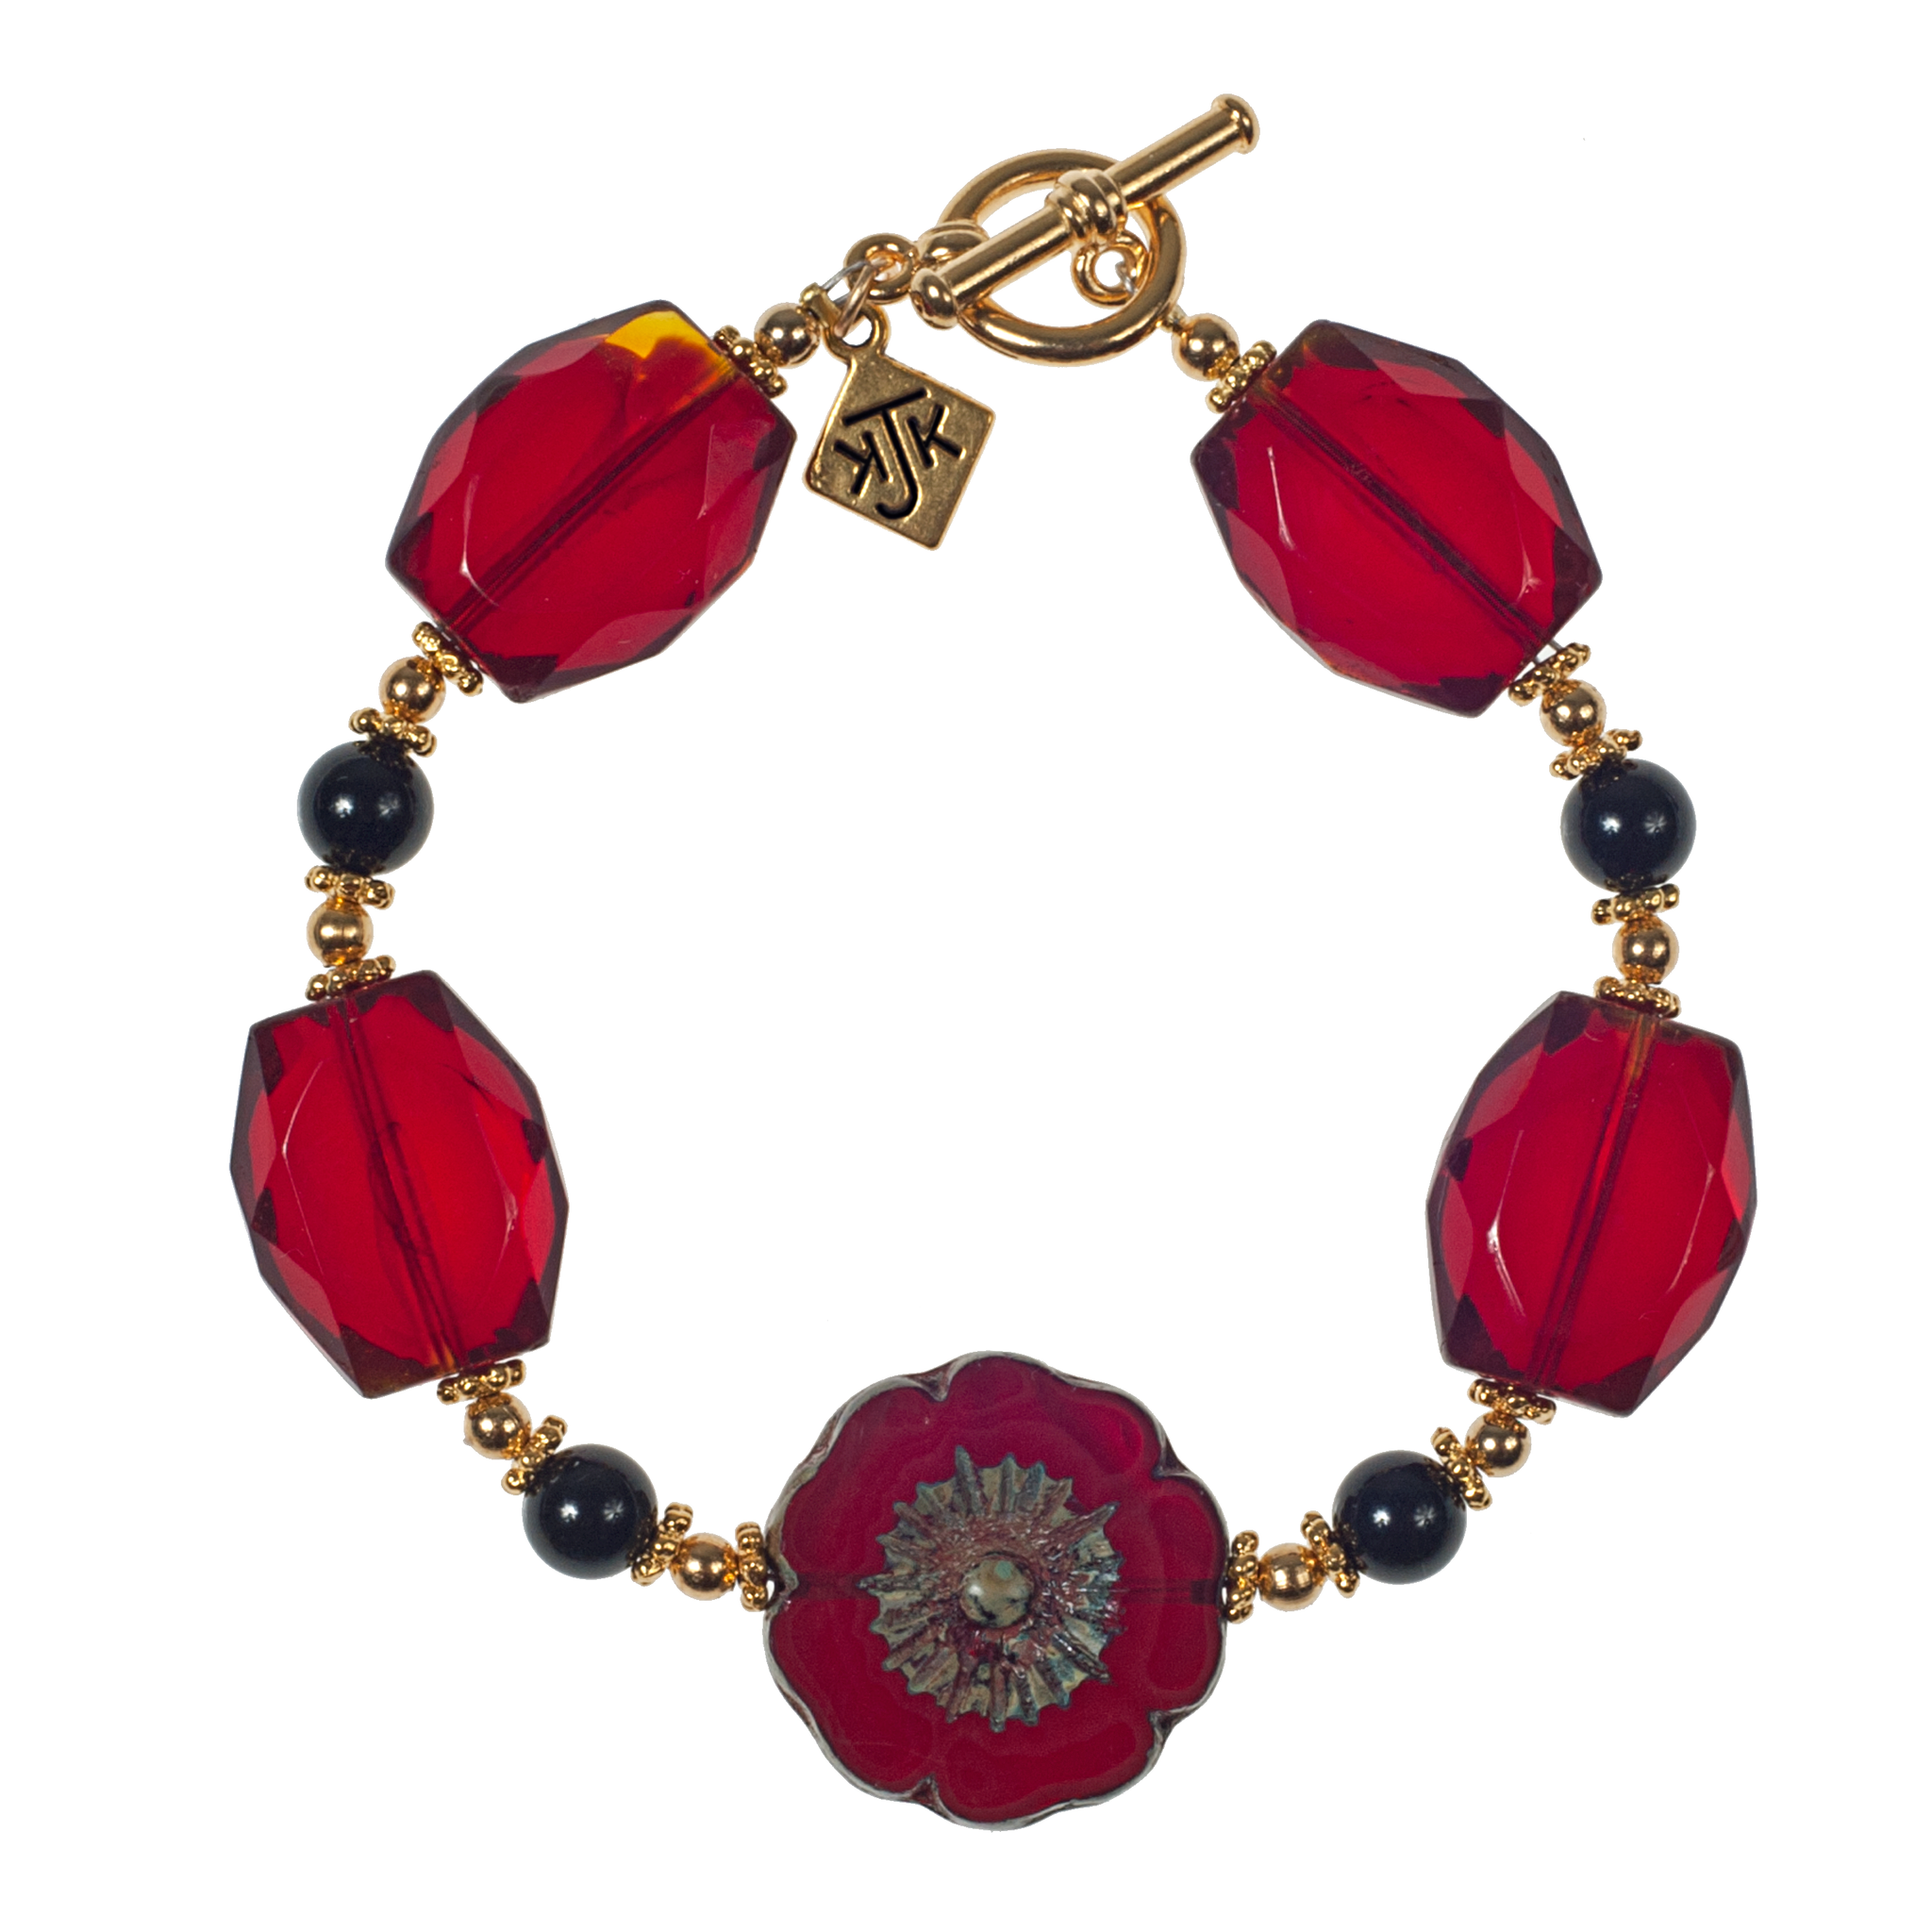 Red Bohemian Glass Flowers, Onyx & Faceted Glass Bracelet With Gold Accents